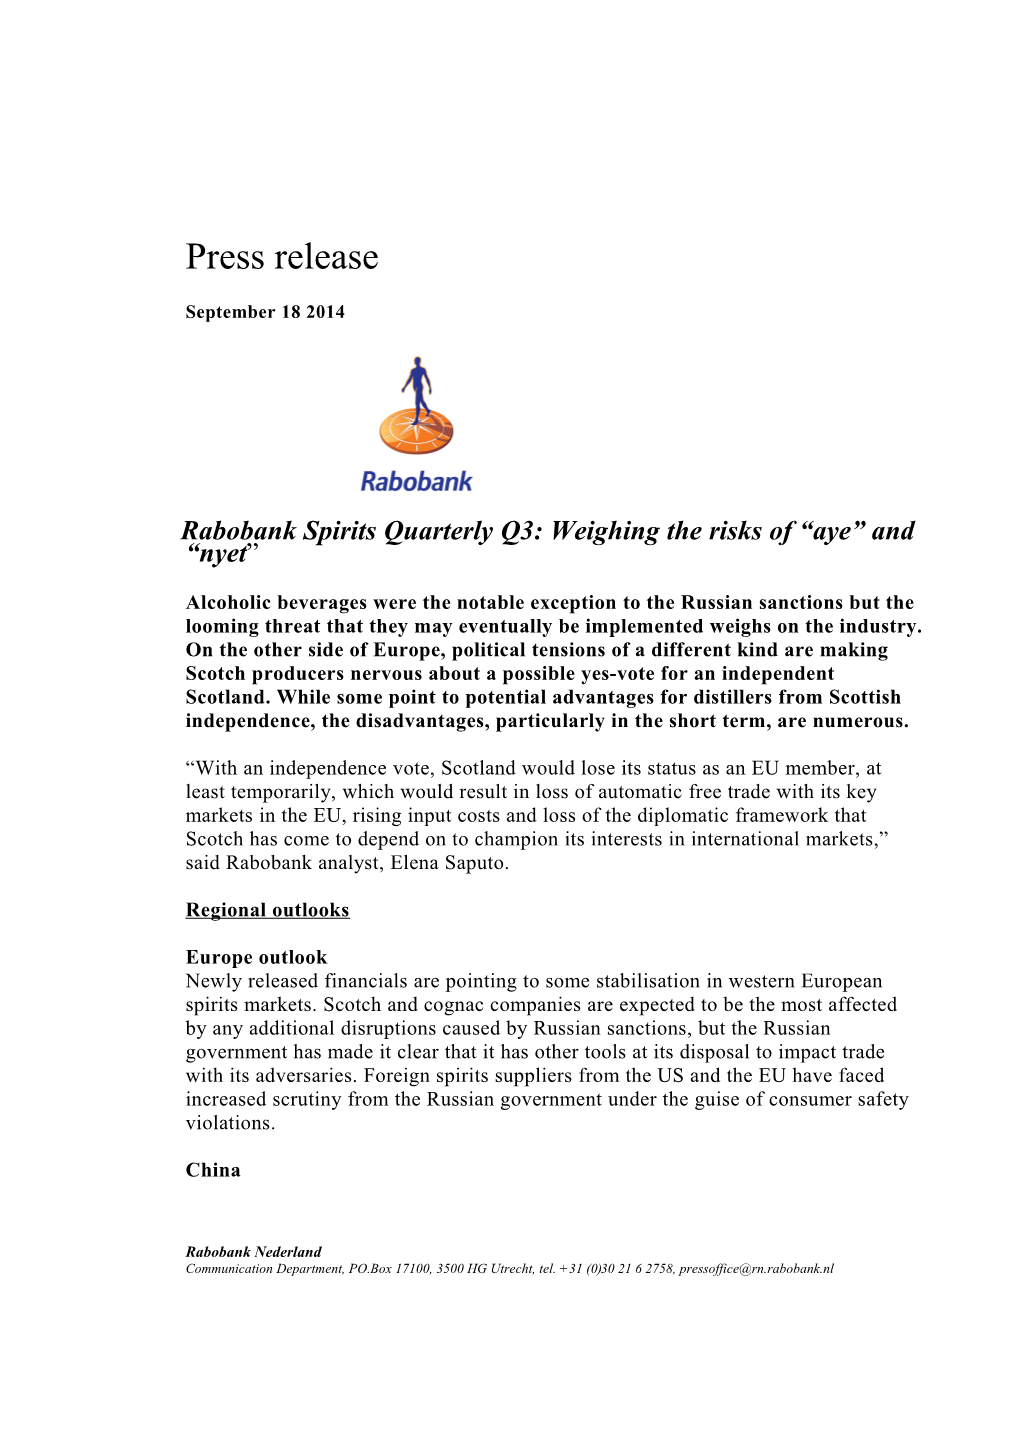 Rabobank Spirits Quarterly Q3: Weighing the Risks of Aye and Nyet